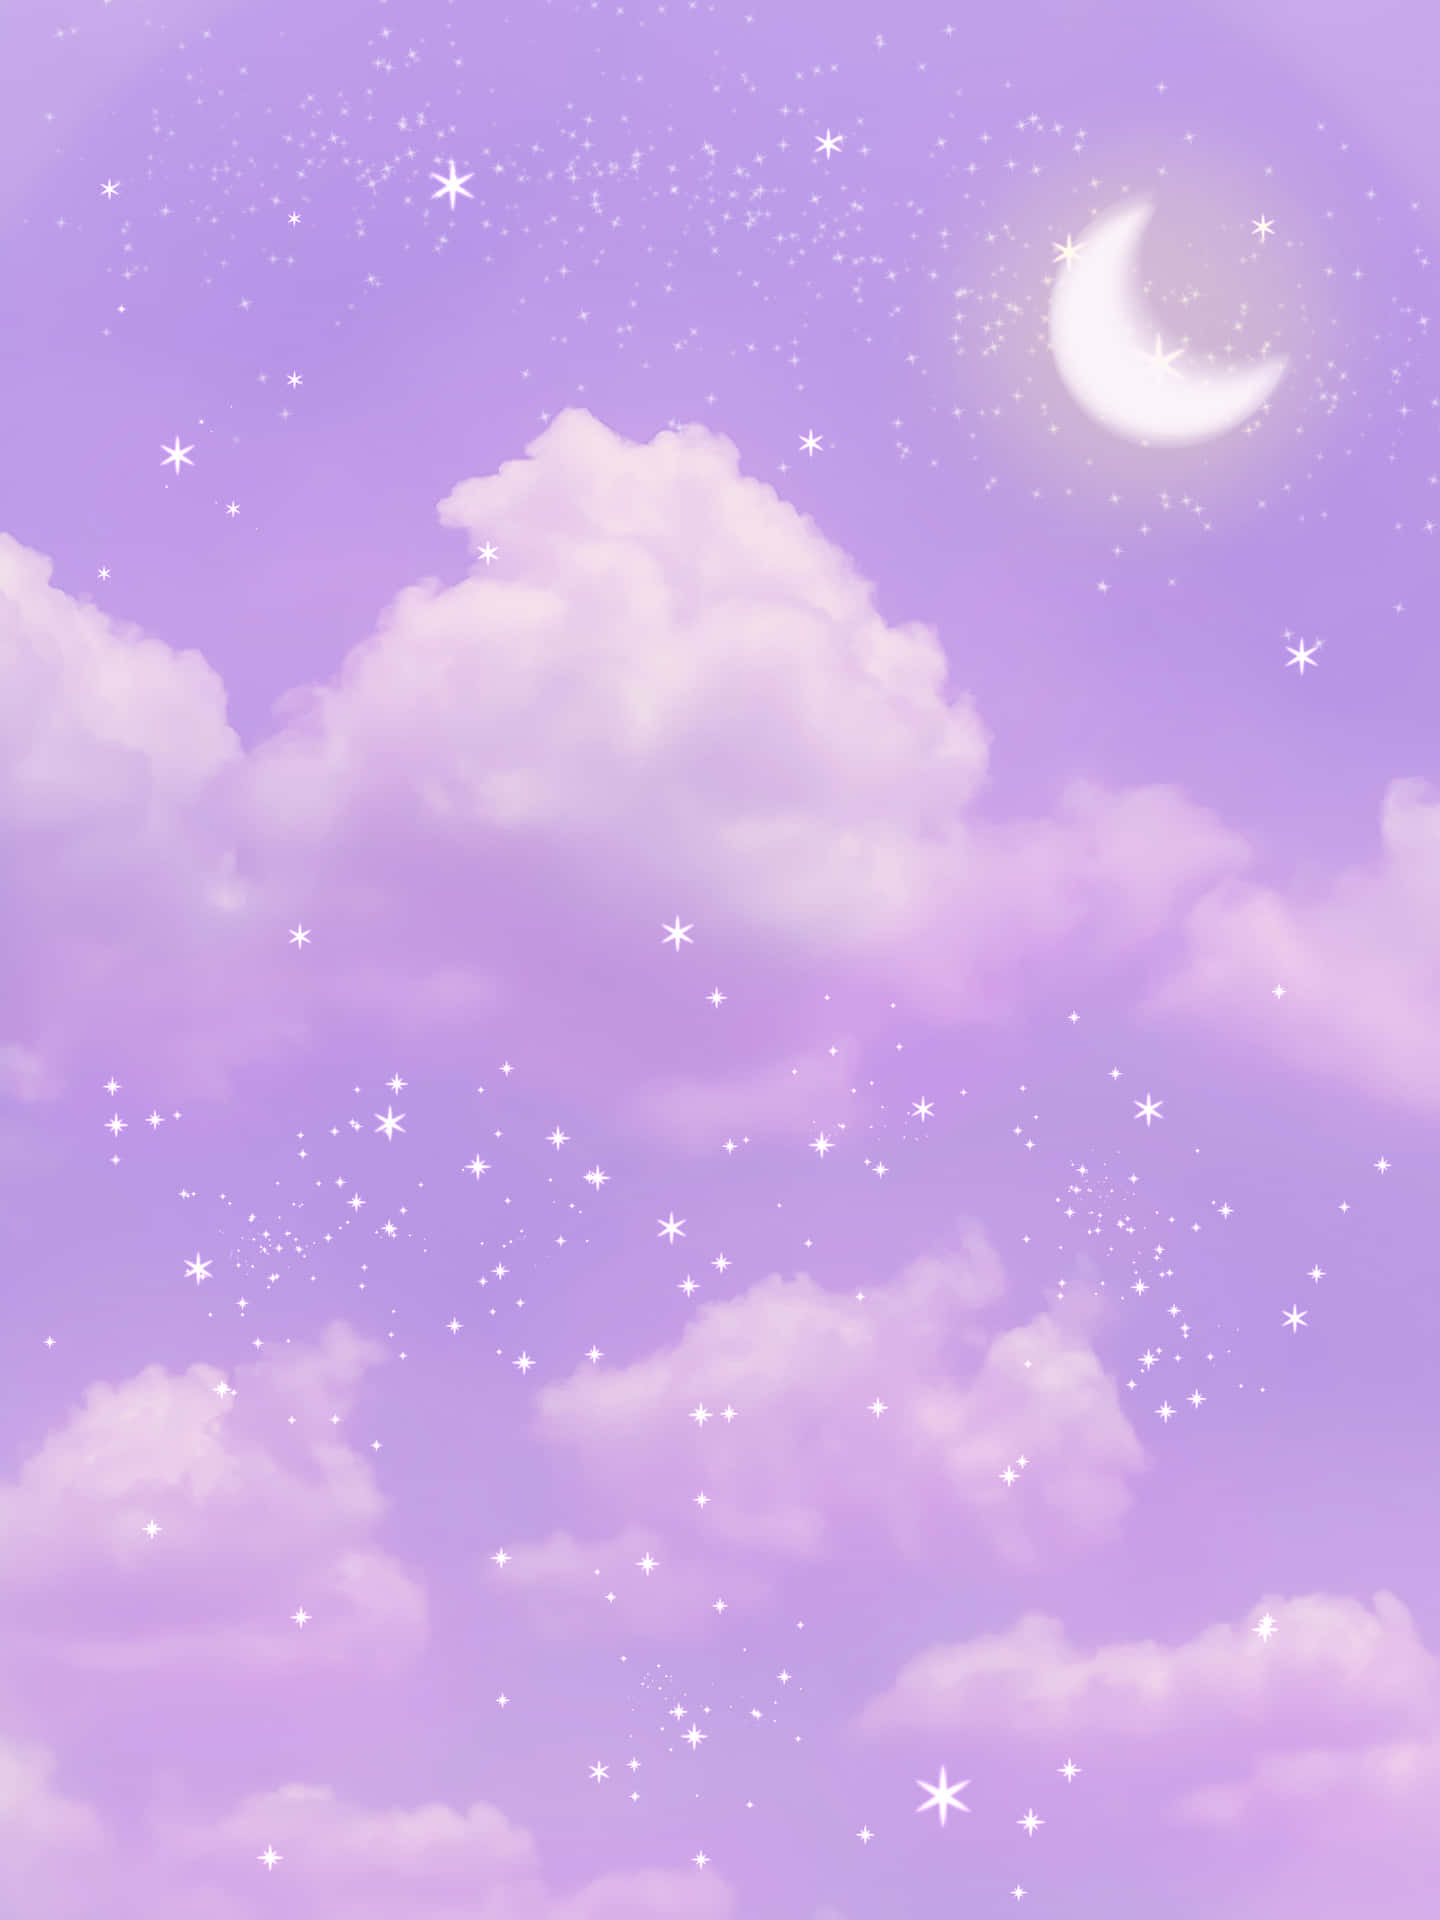 Cute Purple Aesthetic Cloudy Sky With Moon Background